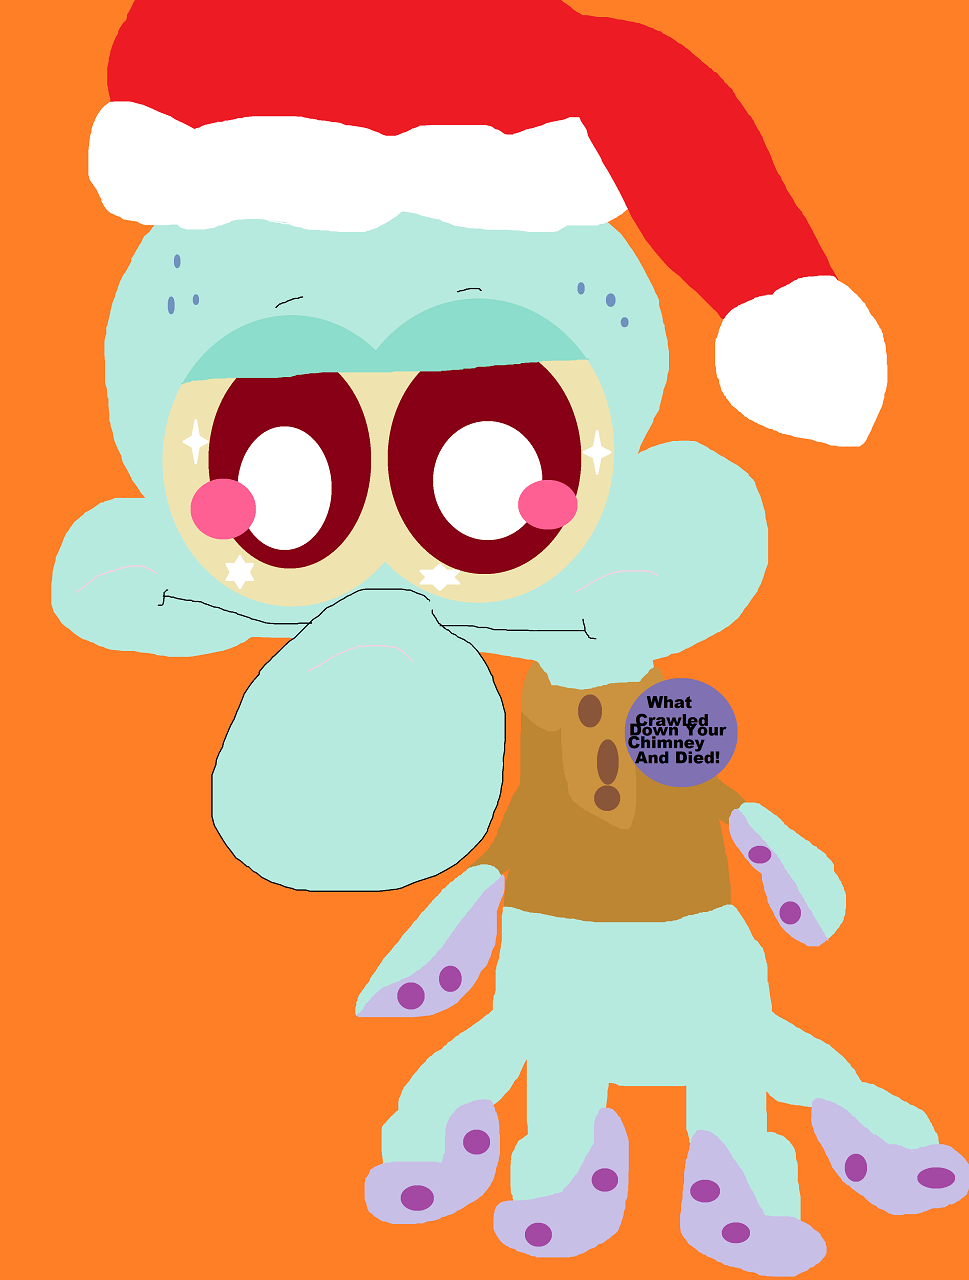 Another Squidward Squishable Holiday Plush by Falconlobo